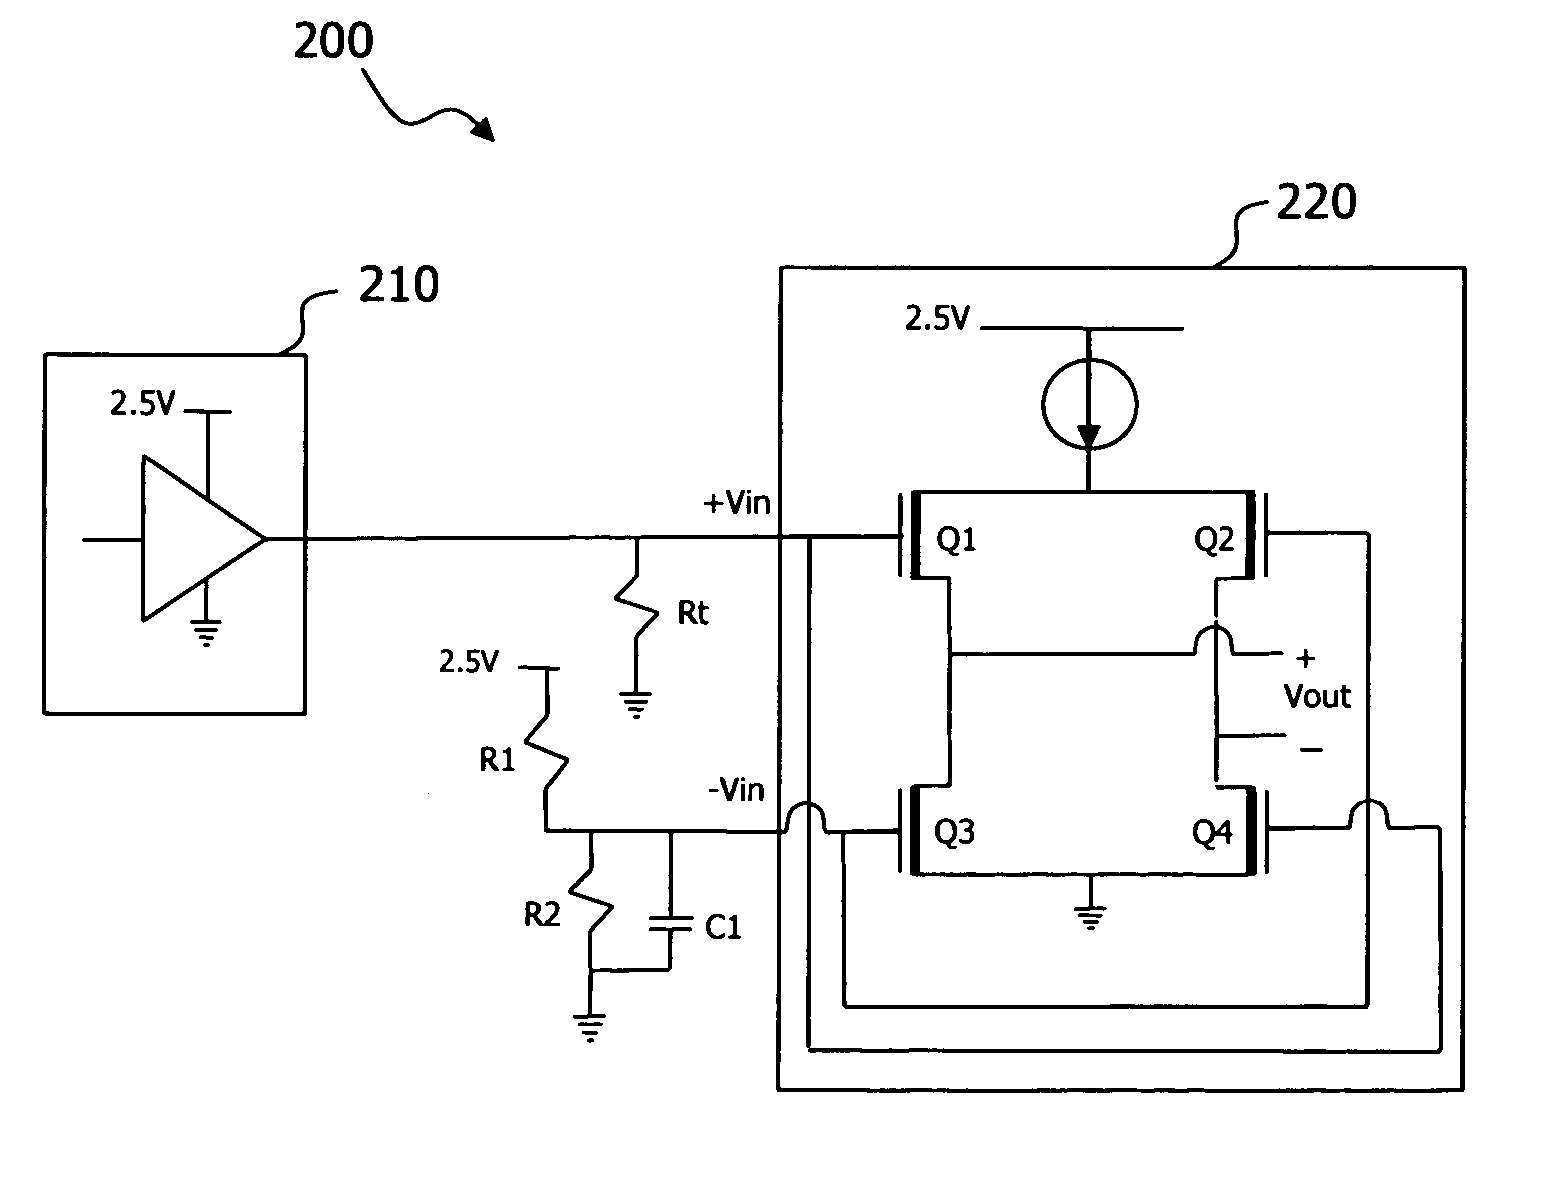 Single-ended CMOS signal interface to differential signal receiver loads